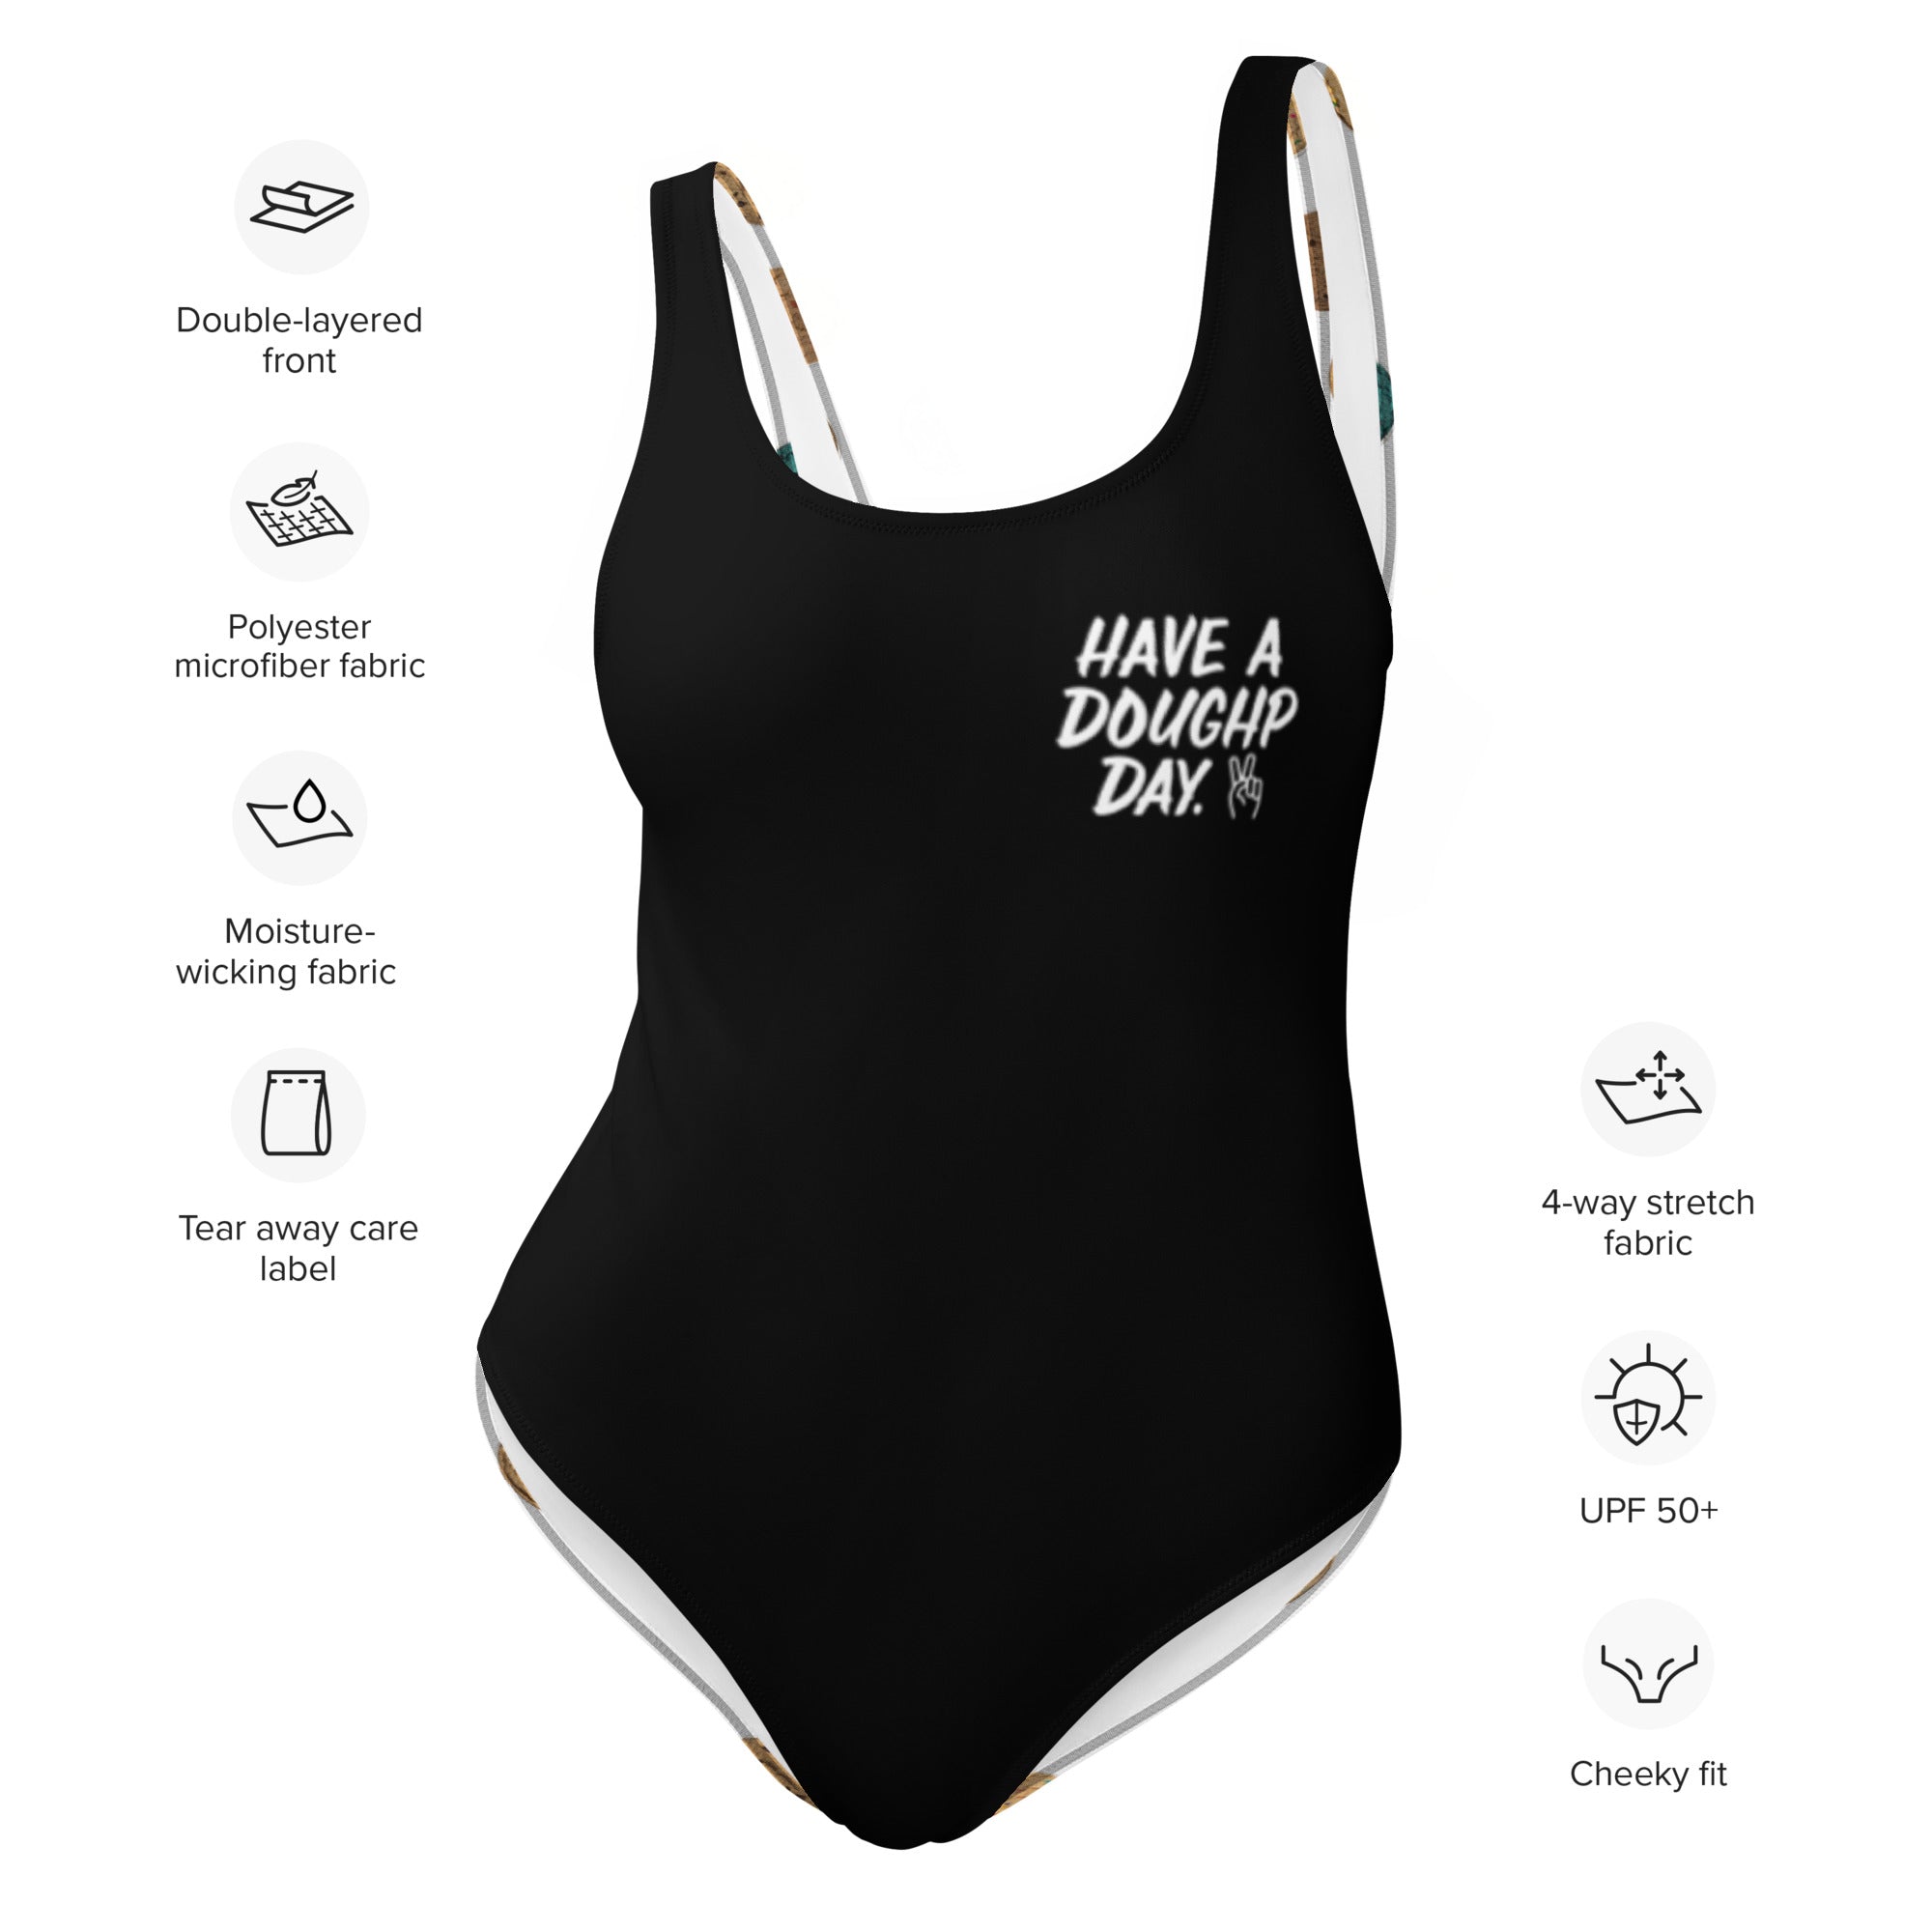 One-Piece "Have a Doughp Day" Swimsuit